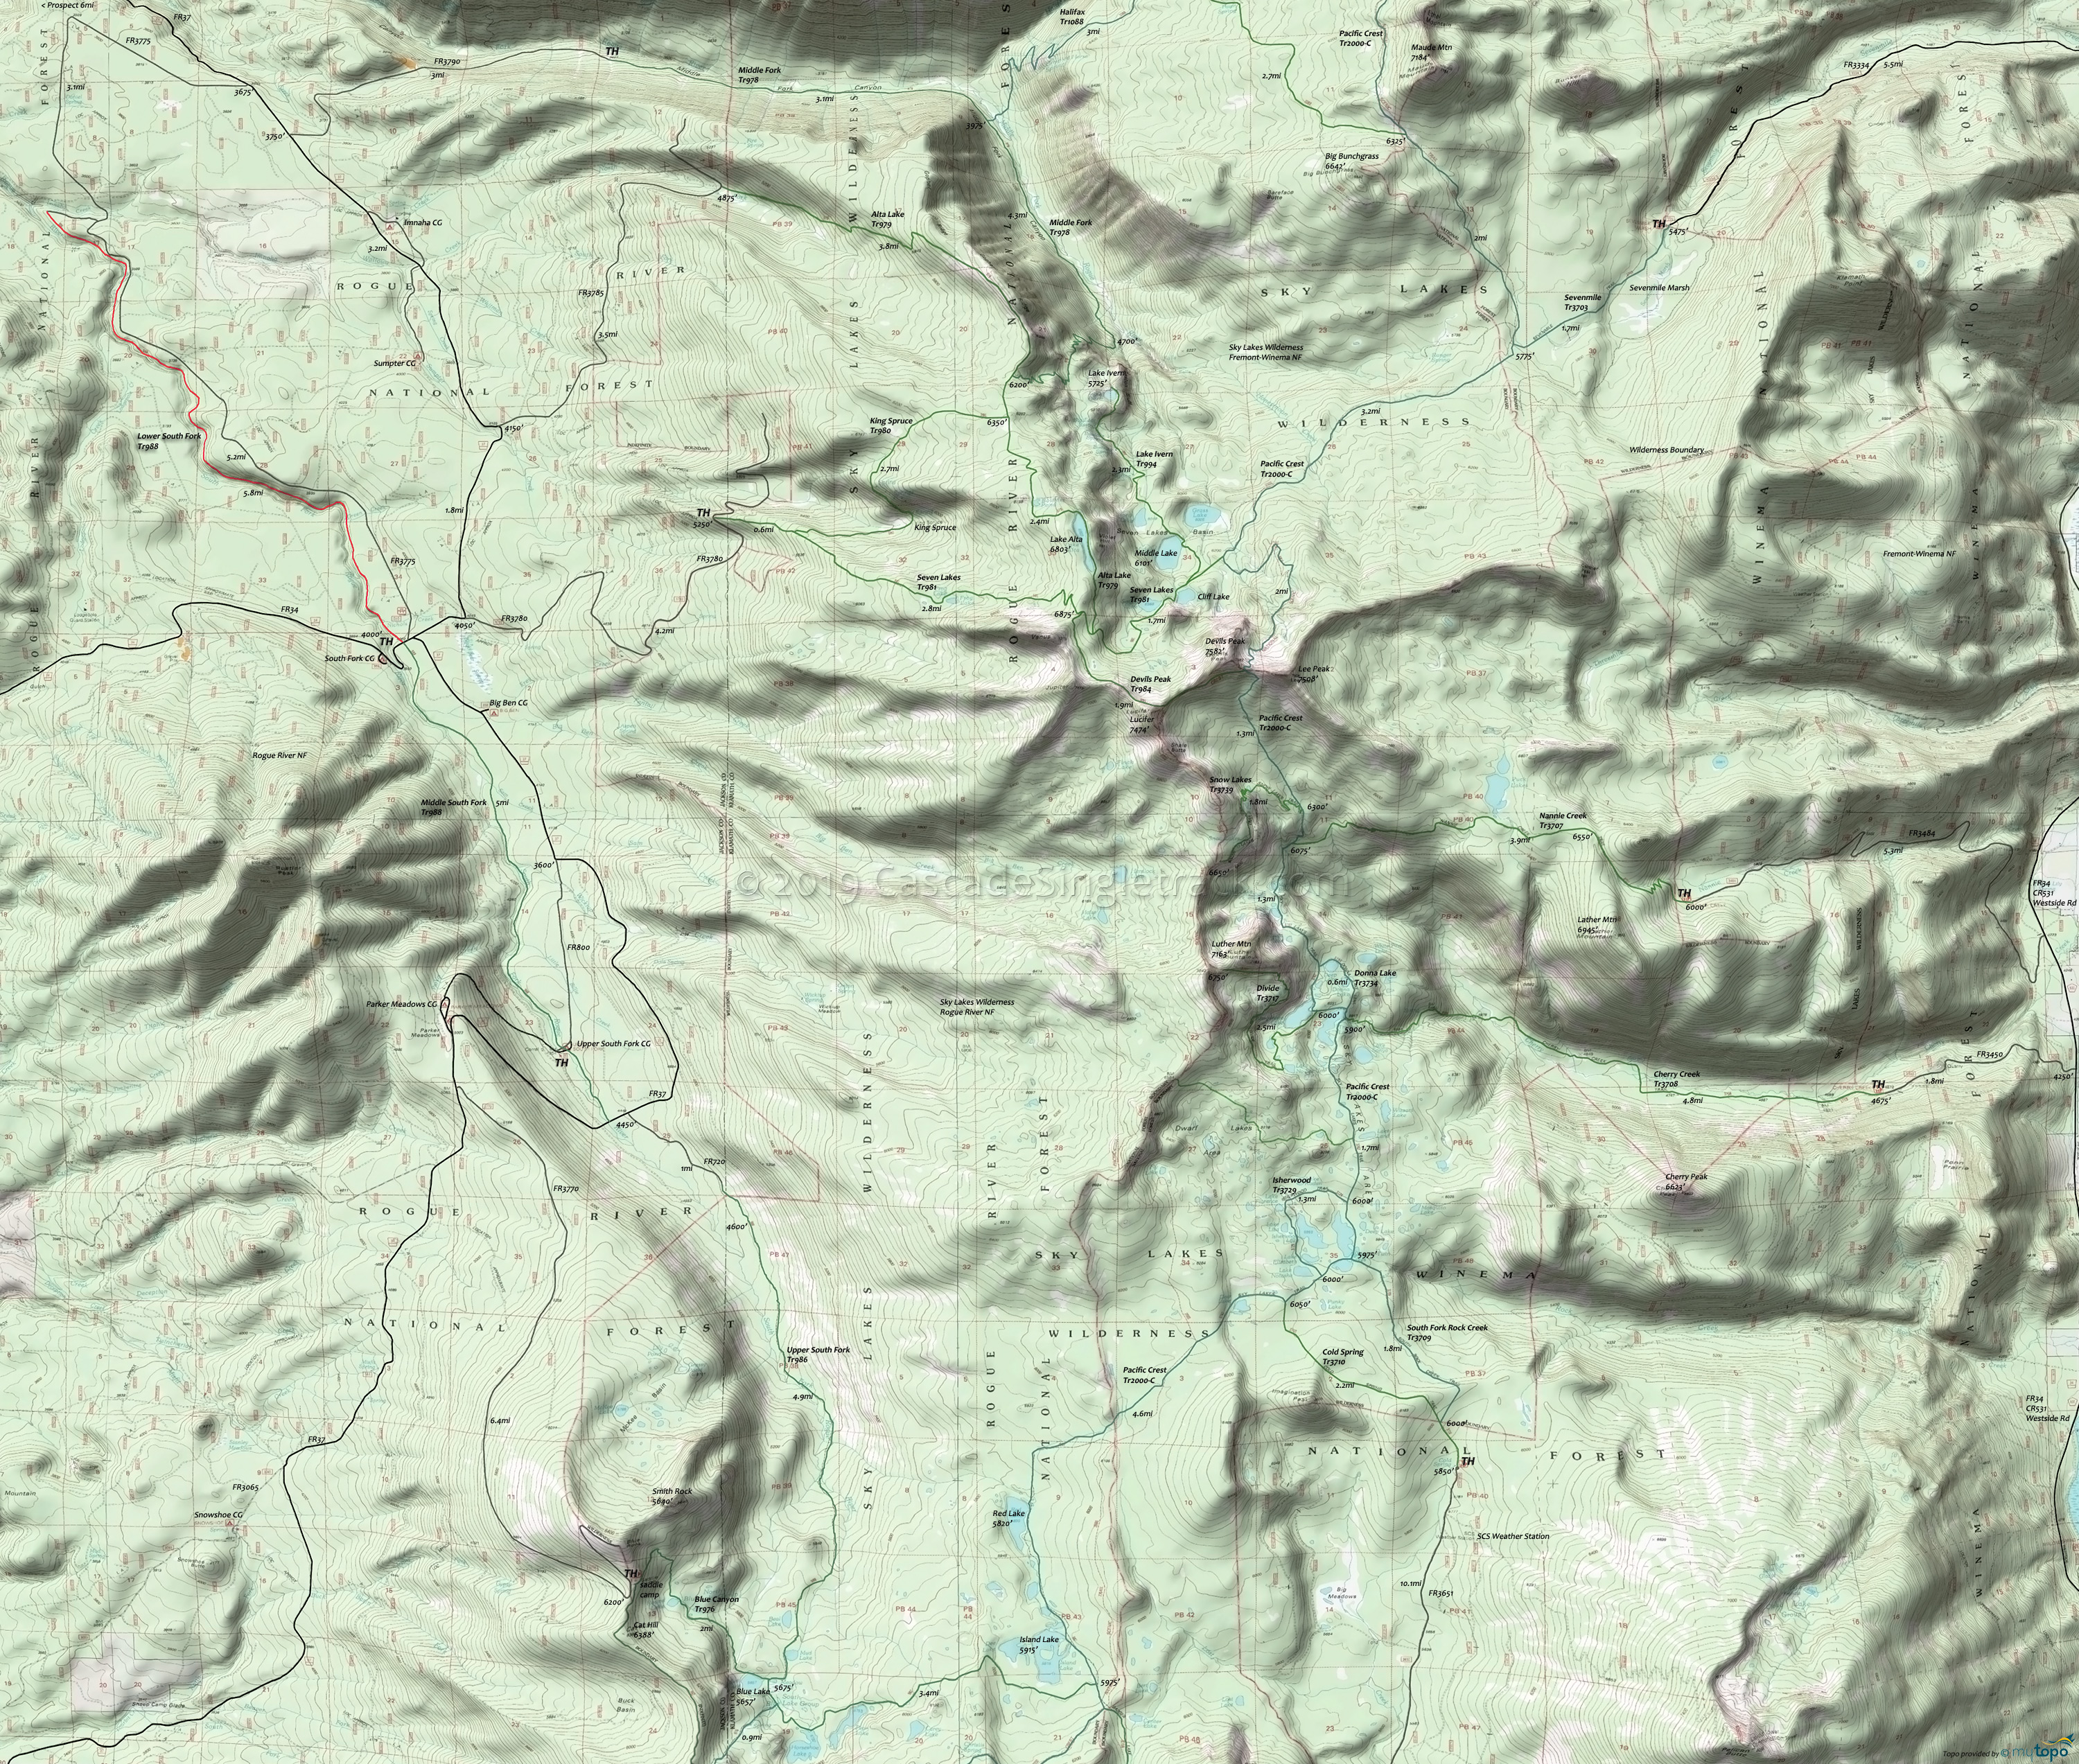  South Fork Rogue River Tr988 Area Topo Map